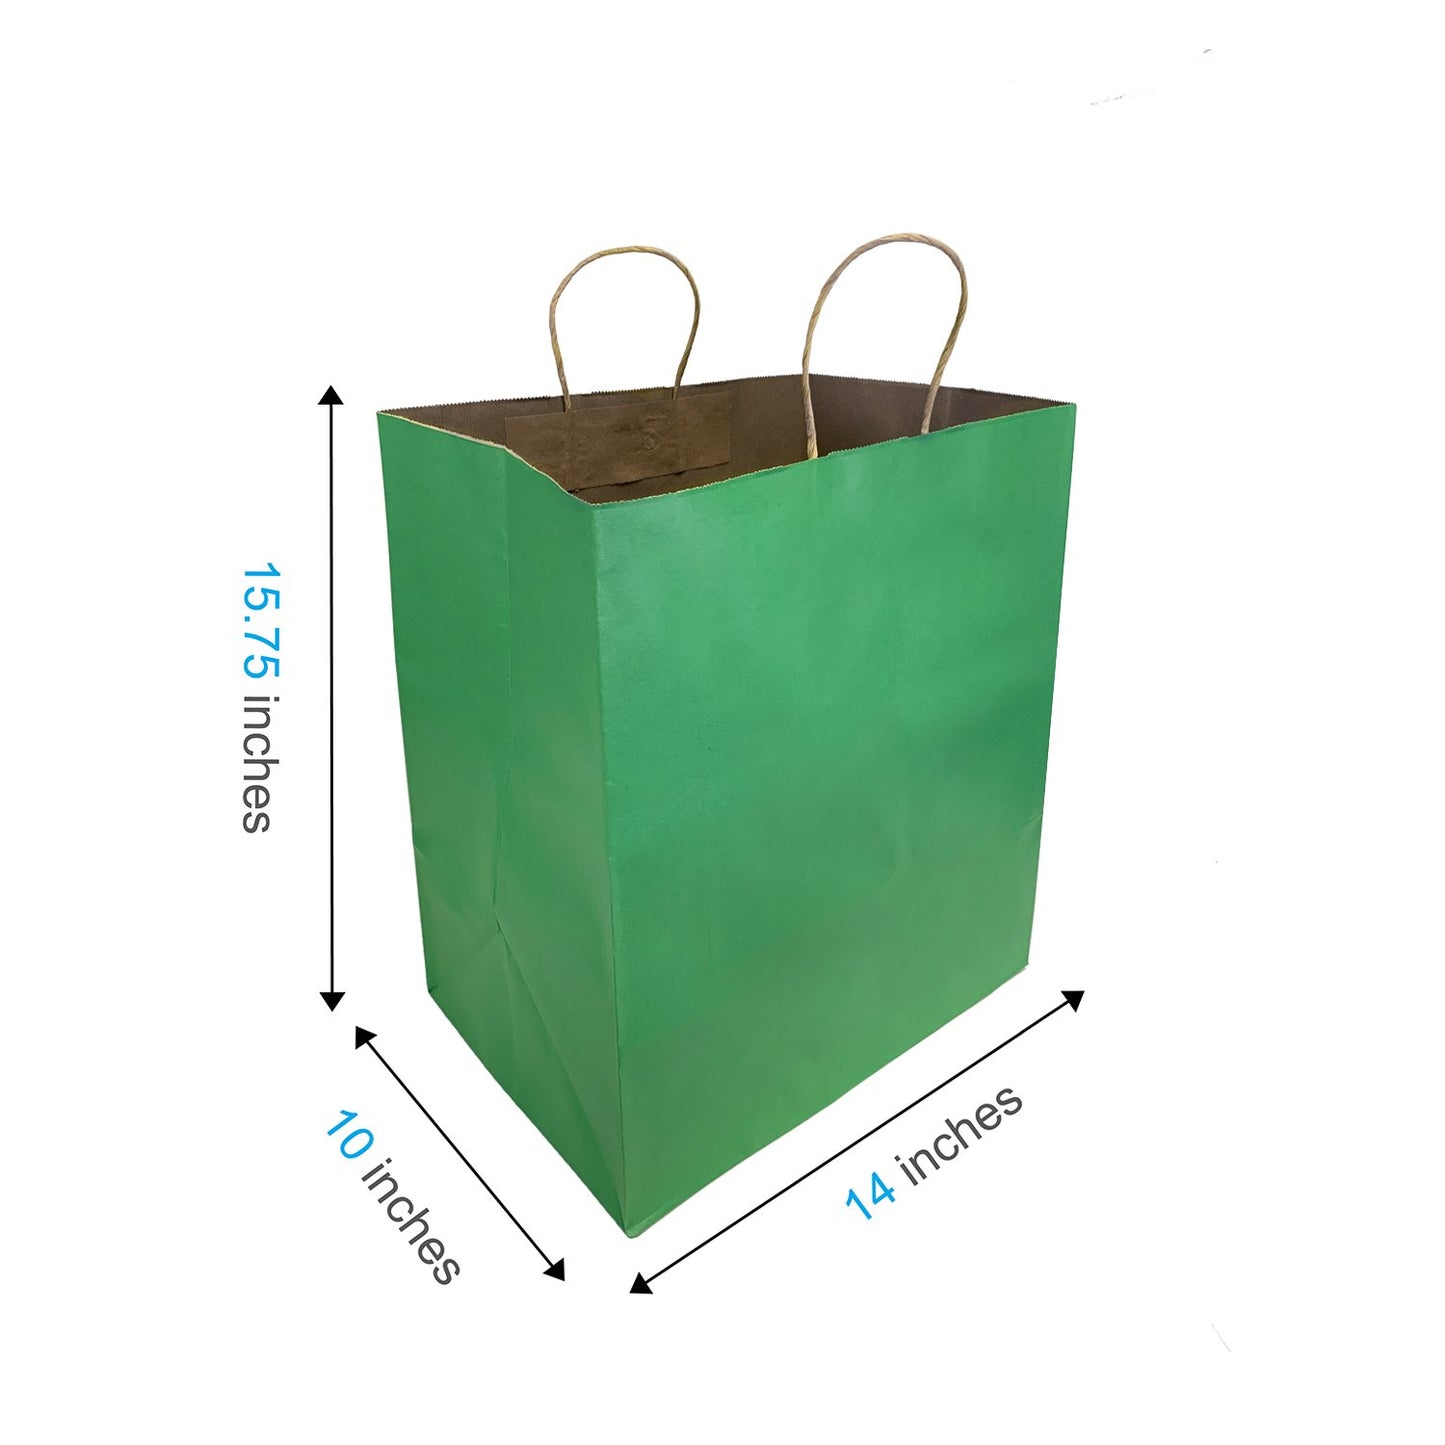 200 Pcs, Super Royal, 14x10x15.75 inches, Green Kraft Paper Bags, with Twisted Handle